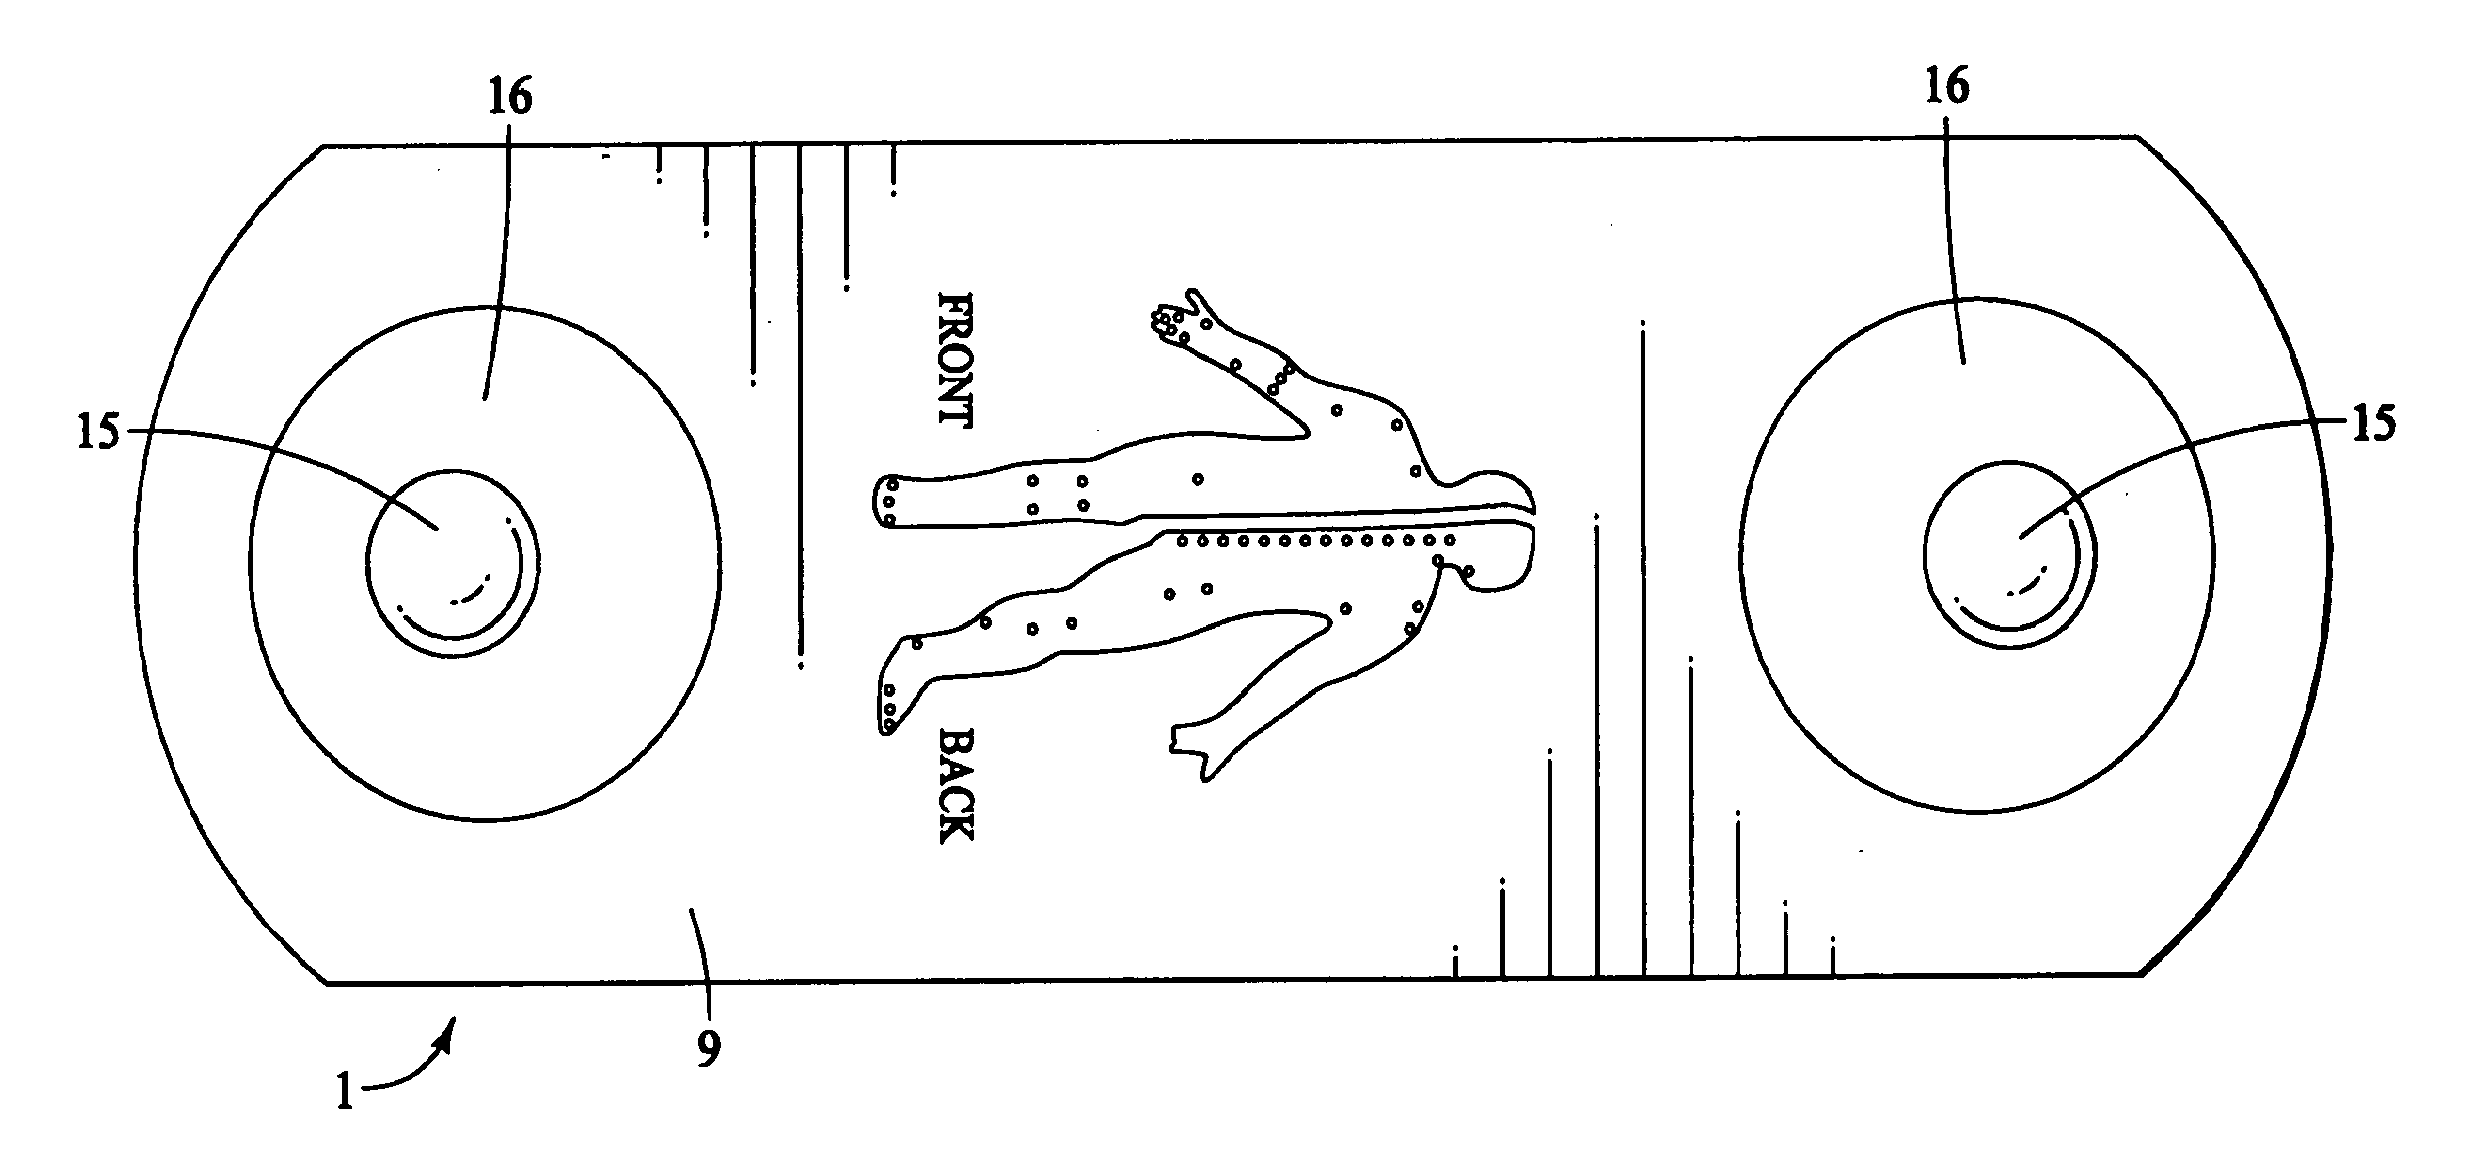 Self-contained electronic musculoskeletal stimulation apparatus and method of use